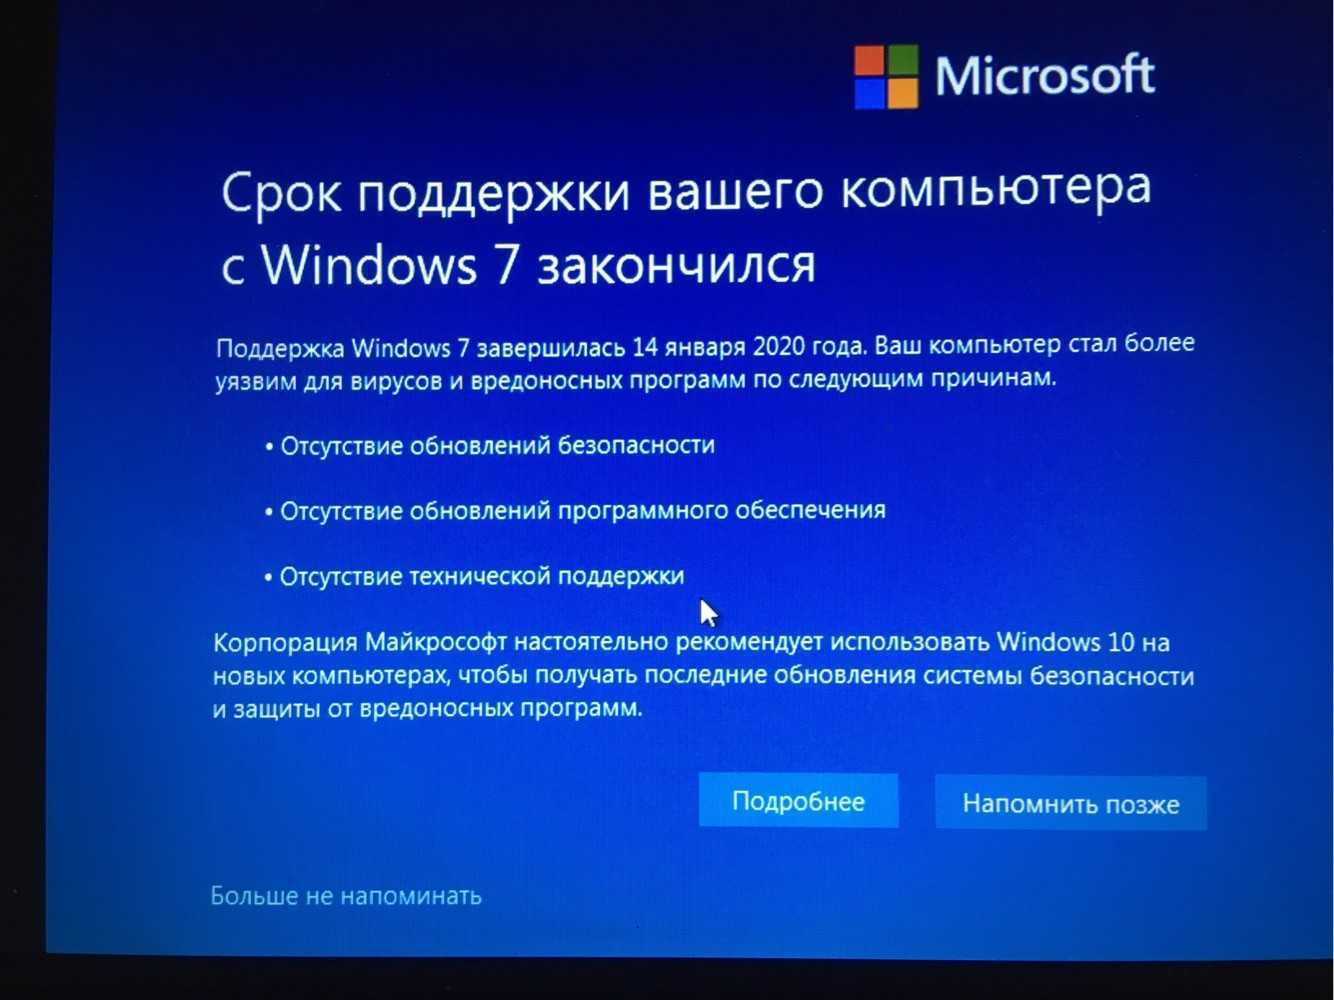 Windows support tools